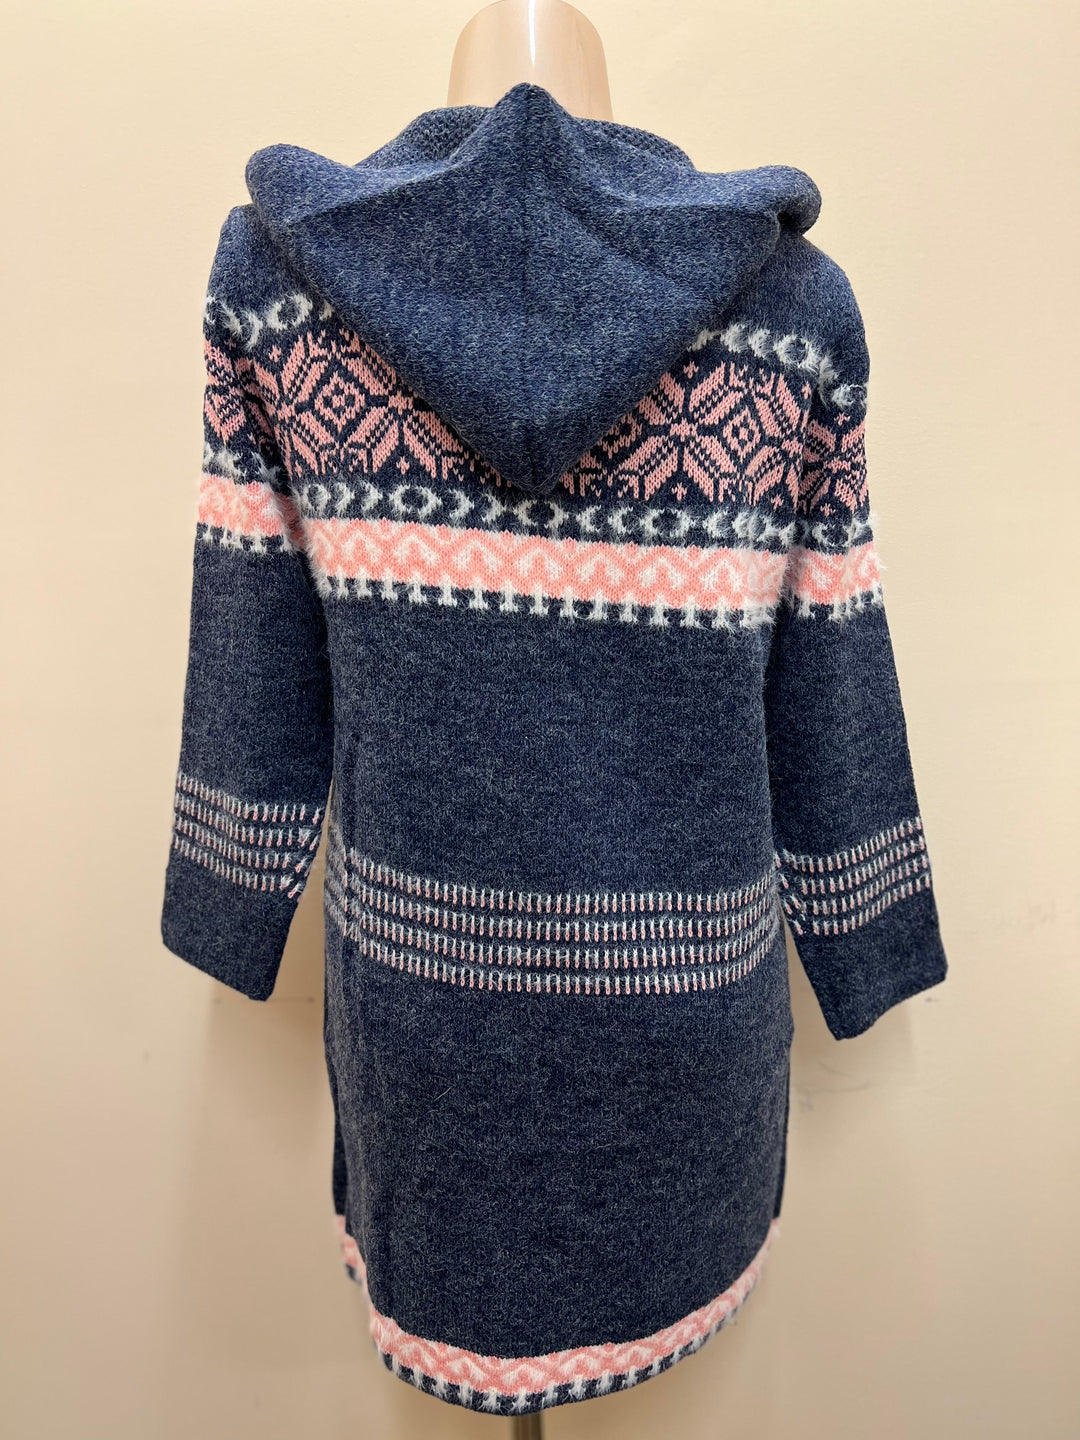 Cathy Open Cardigan - Size X-Large